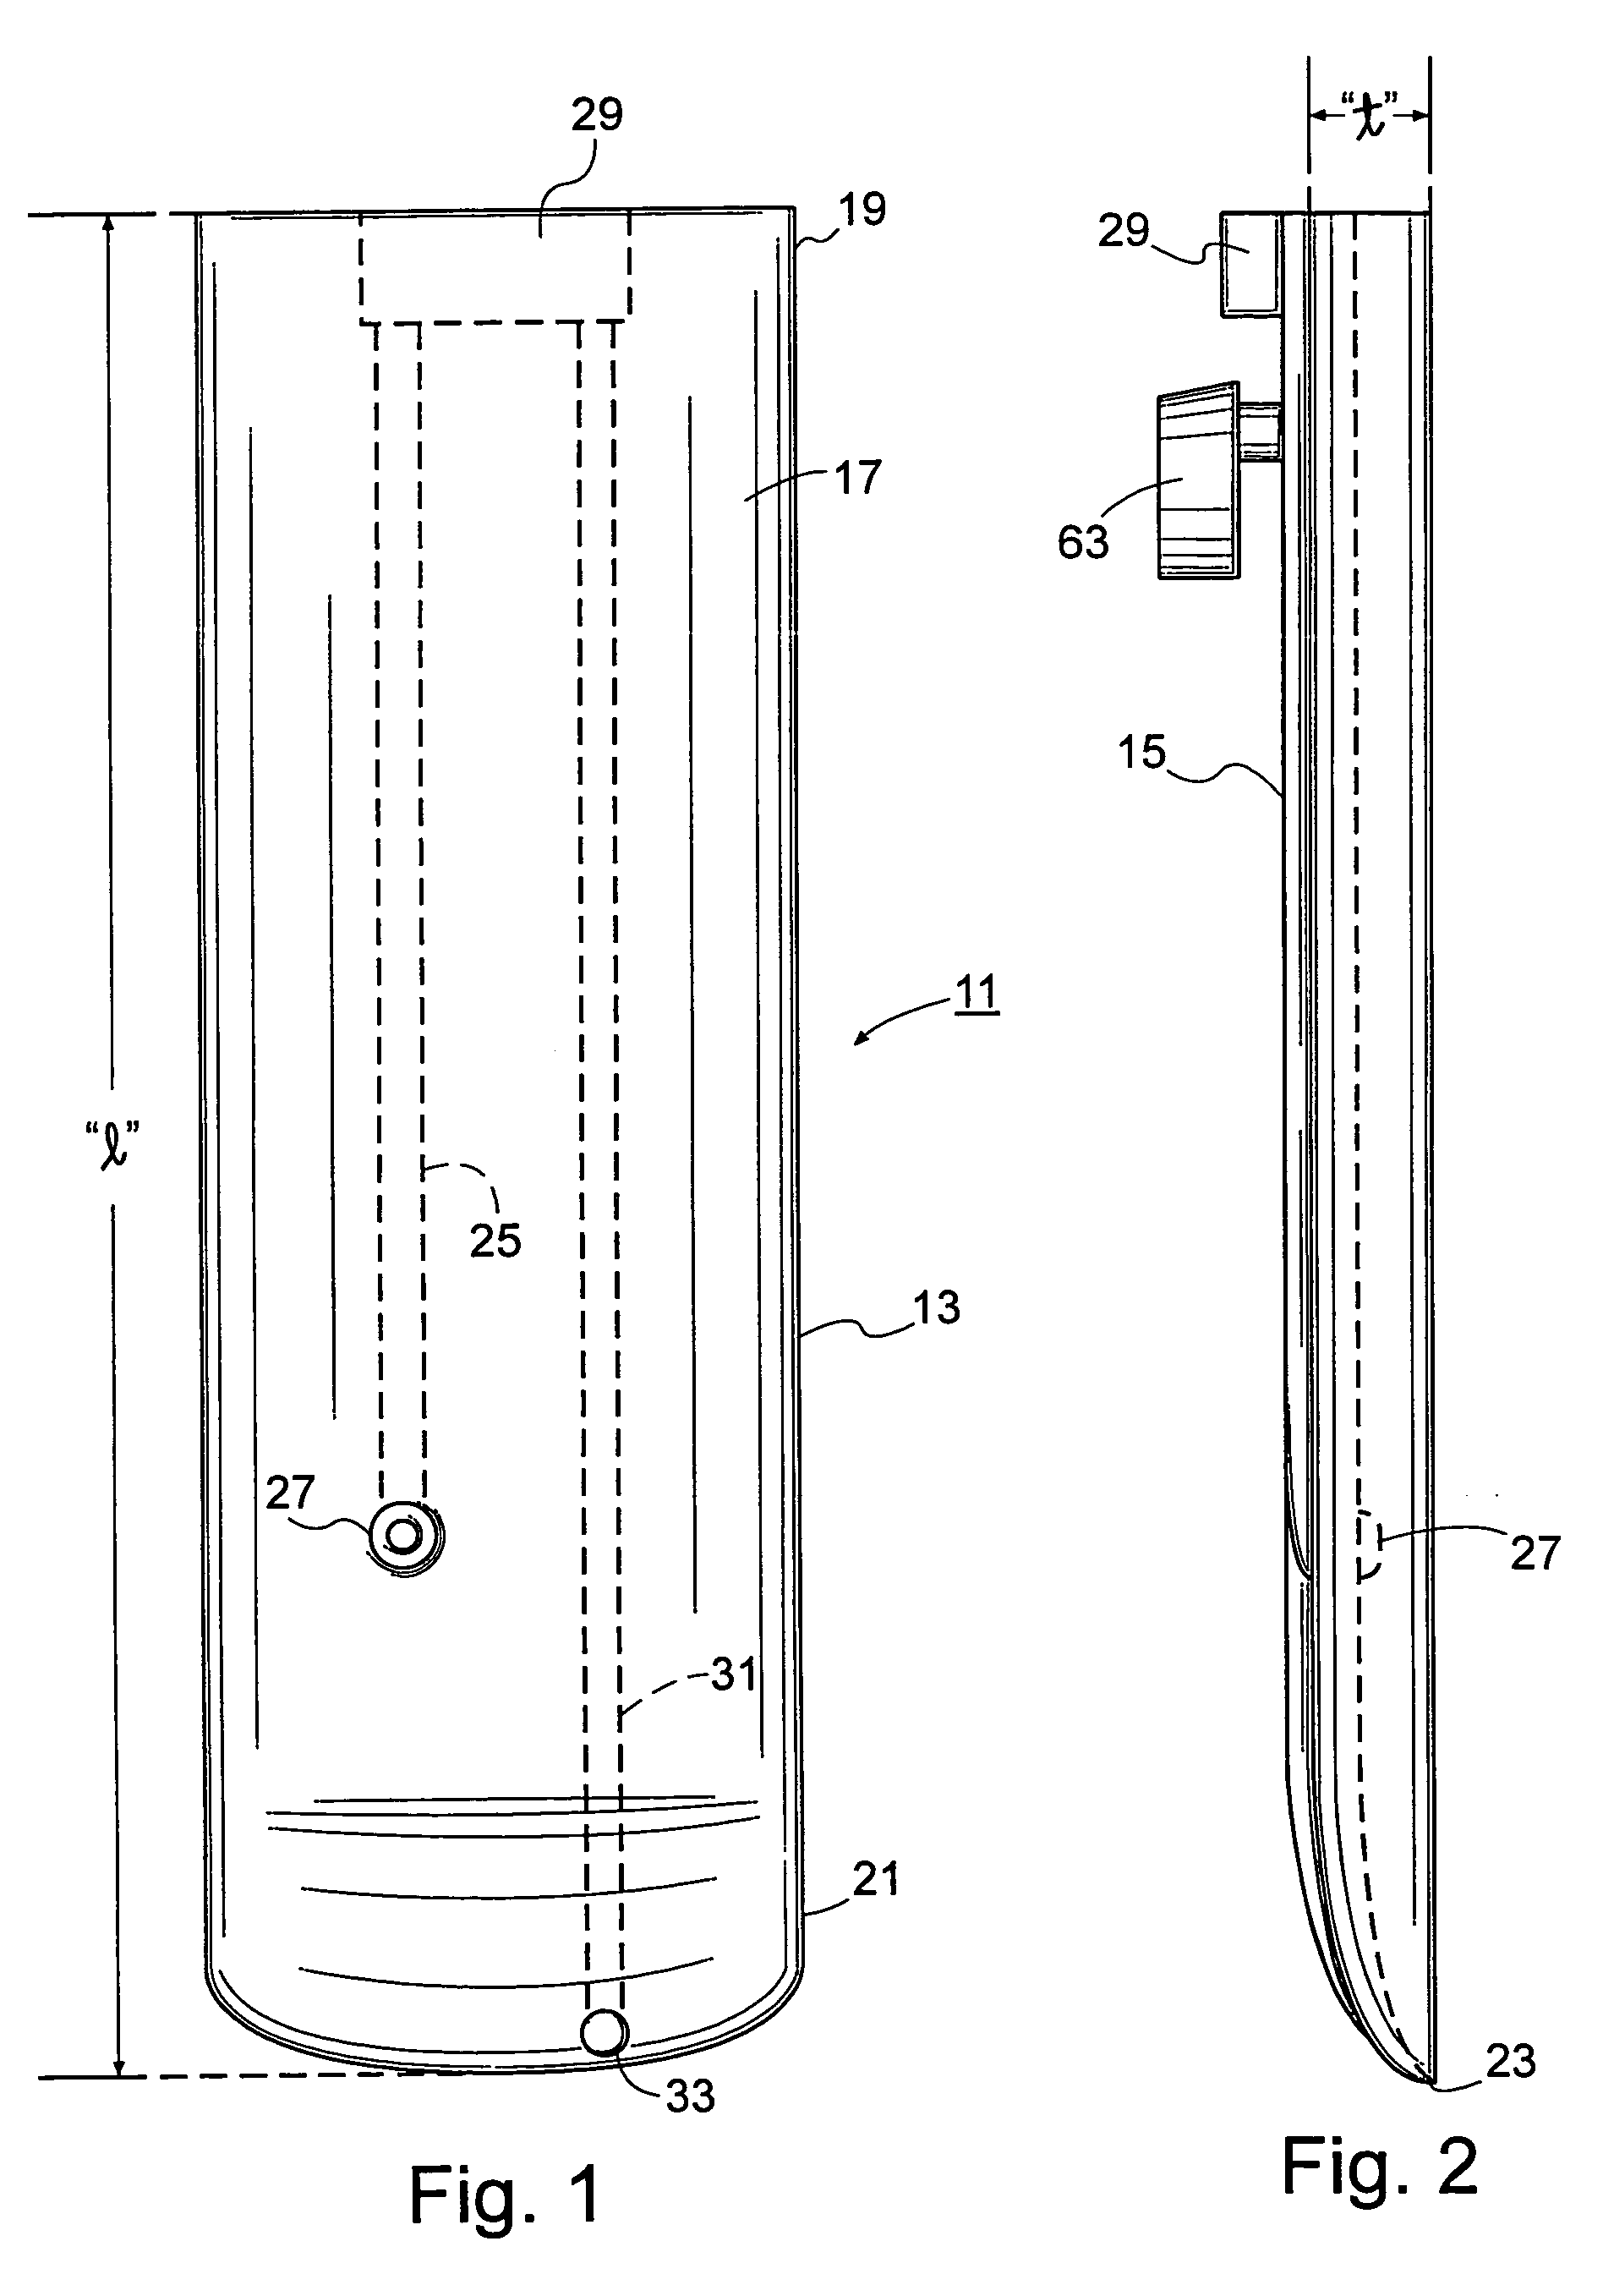 Minimally invasive surgical spinal exposure system